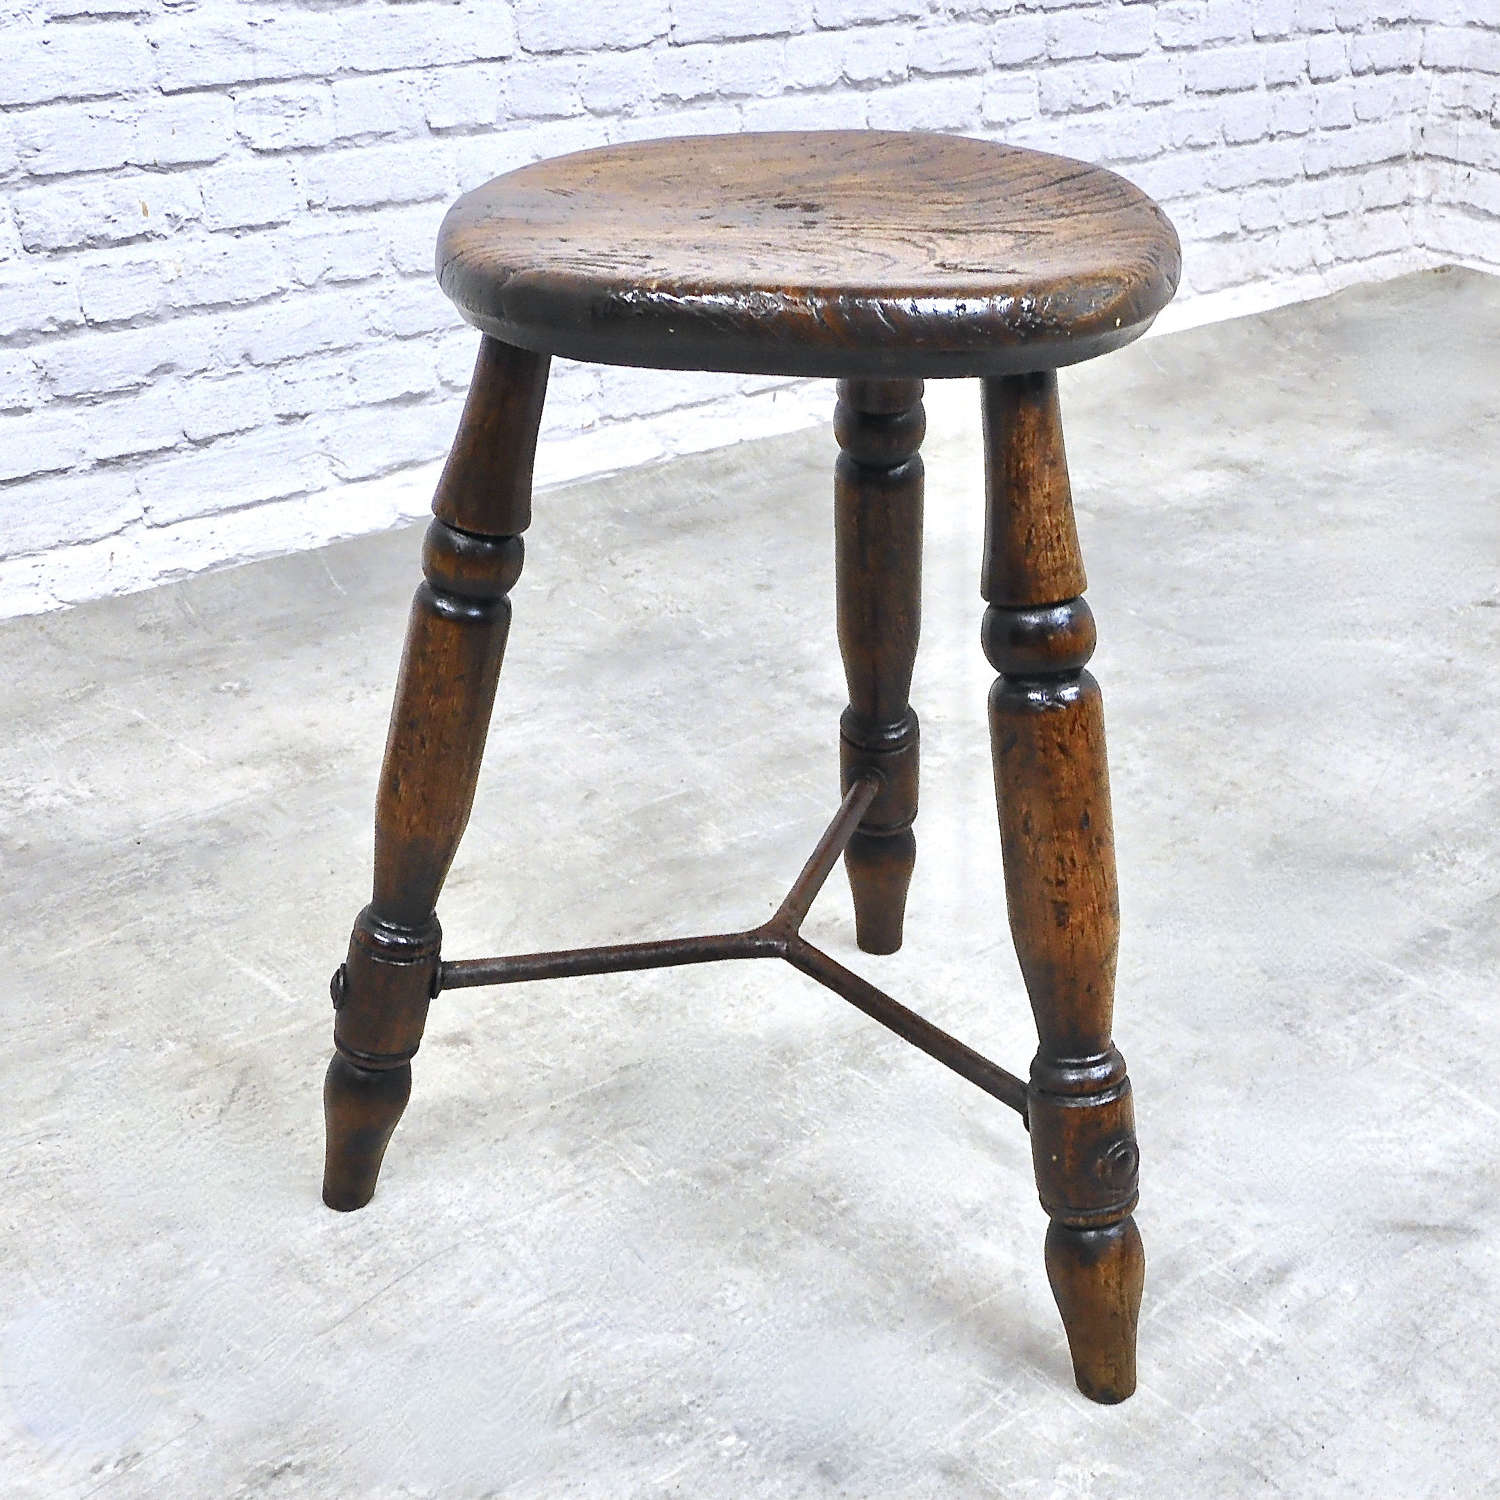 C19th Lacemaker's Stool